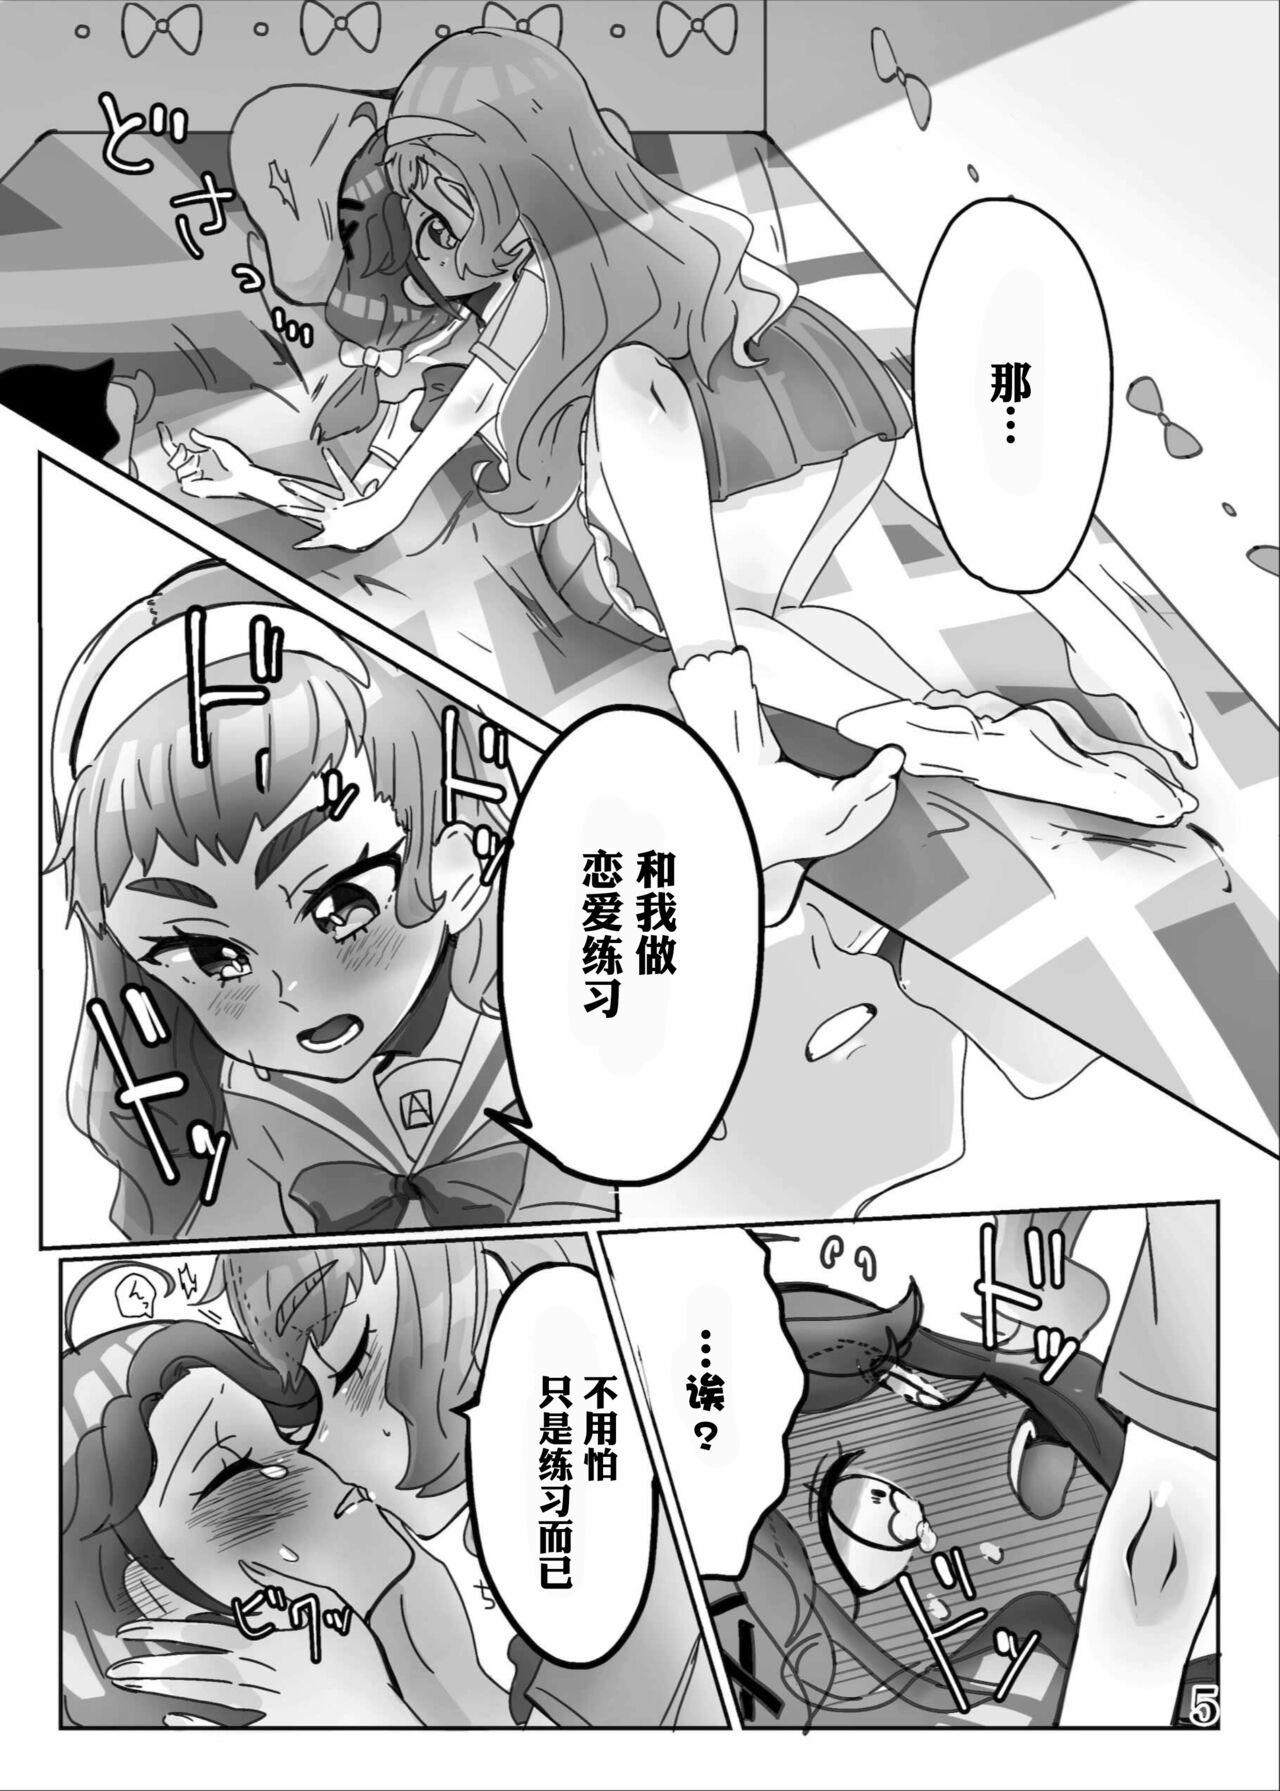 Cocksuckers yaritaigotone do my best - Pretty cure Tropical rouge precure Cock - Page 7